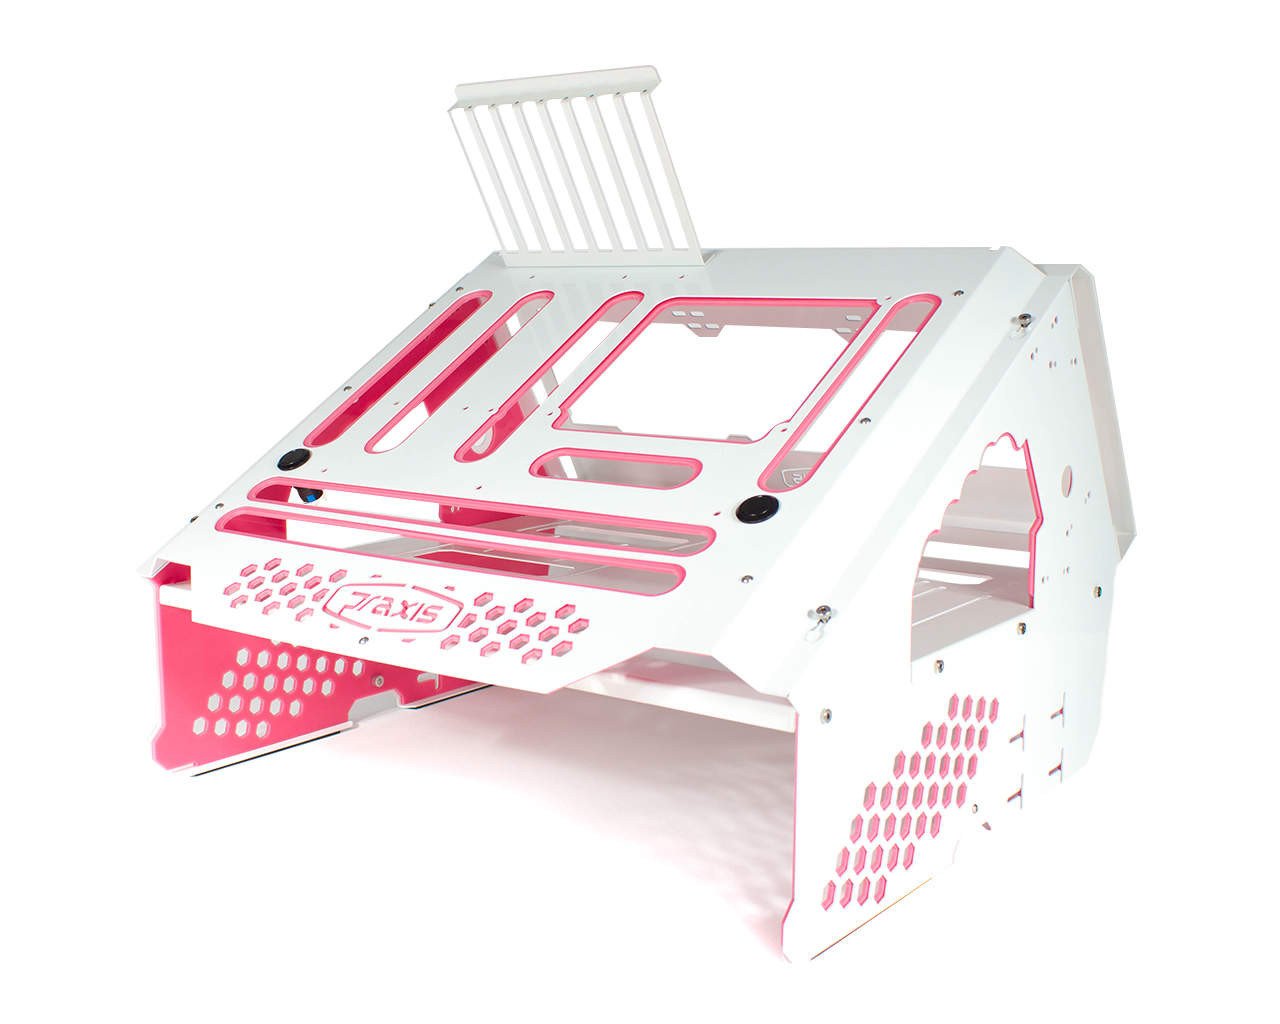 Praxis WetBench - PrimoChill - KEEPING IT COOL White w/Solid Light Pink Accents